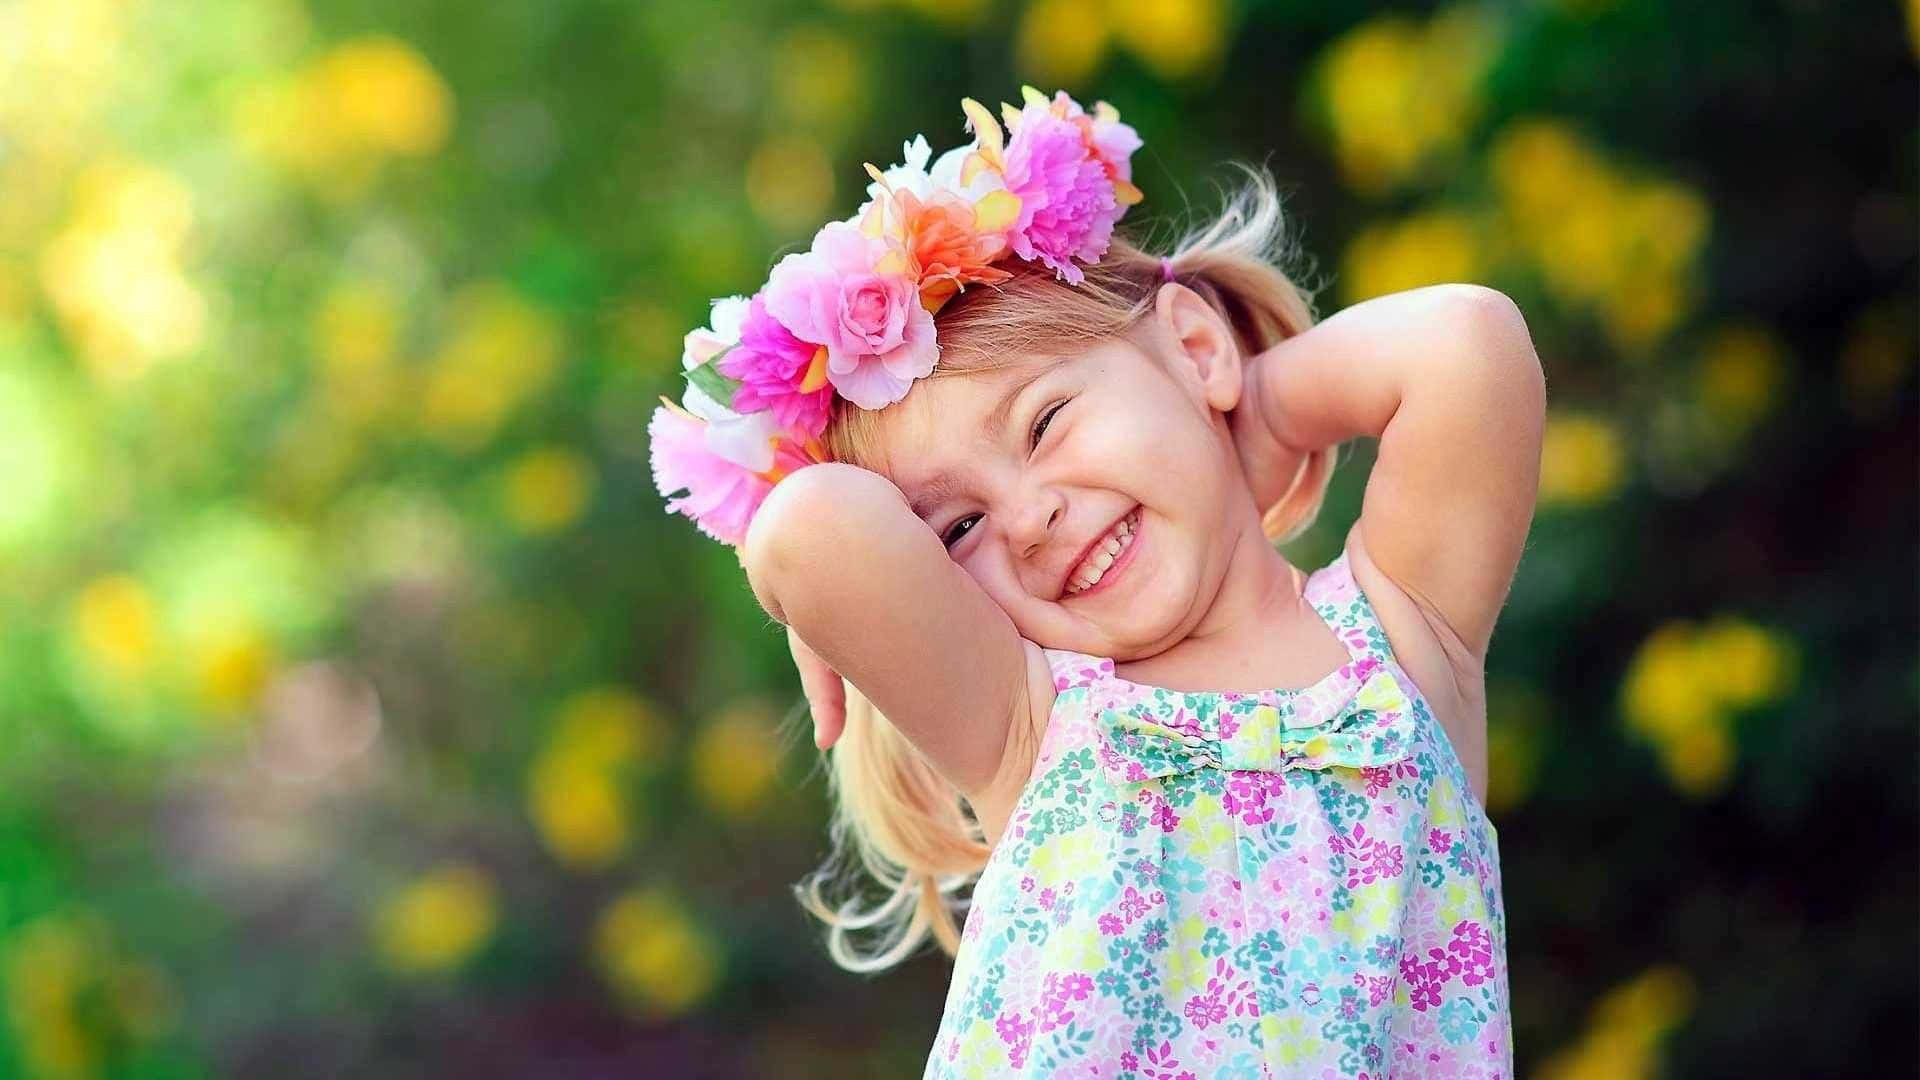 laughing baby pictures wallpaper